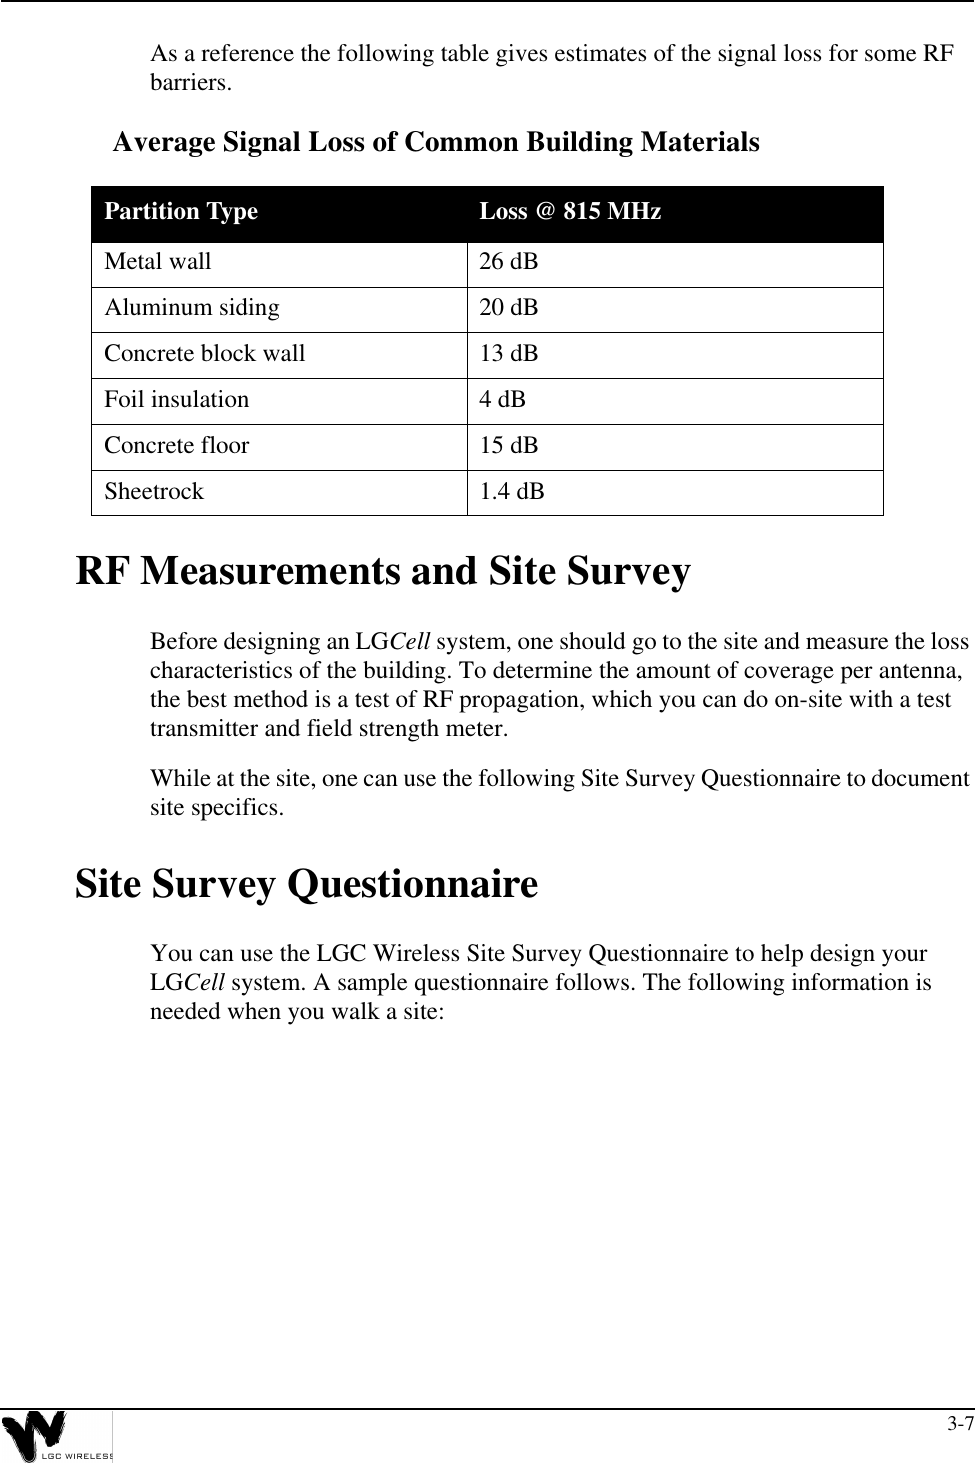 3-7As a reference the following table gives estimates of the signal loss for some RF barriers.Average Signal Loss of Common Building MaterialsRF Measurements and Site SurveyBefore designing an LGCell system, one should go to the site and measure the loss characteristics of the building. To determine the amount of coverage per antenna, the best method is a test of RF propagation, which you can do on-site with a test transmitter and field strength meter.While at the site, one can use the following Site Survey Questionnaire to document site specifics.Site Survey QuestionnaireYou can use the LGC Wireless Site Survey Questionnaire to help design your LGCell system. A sample questionnaire follows. The following information is needed when you walk a site:Partition Type Loss @ 815 MHzMetal wall 26 dBAluminum siding 20 dBConcrete block wall 13 dBFoil insulation 4 dBConcrete floor 15 dBSheetrock 1.4 dB